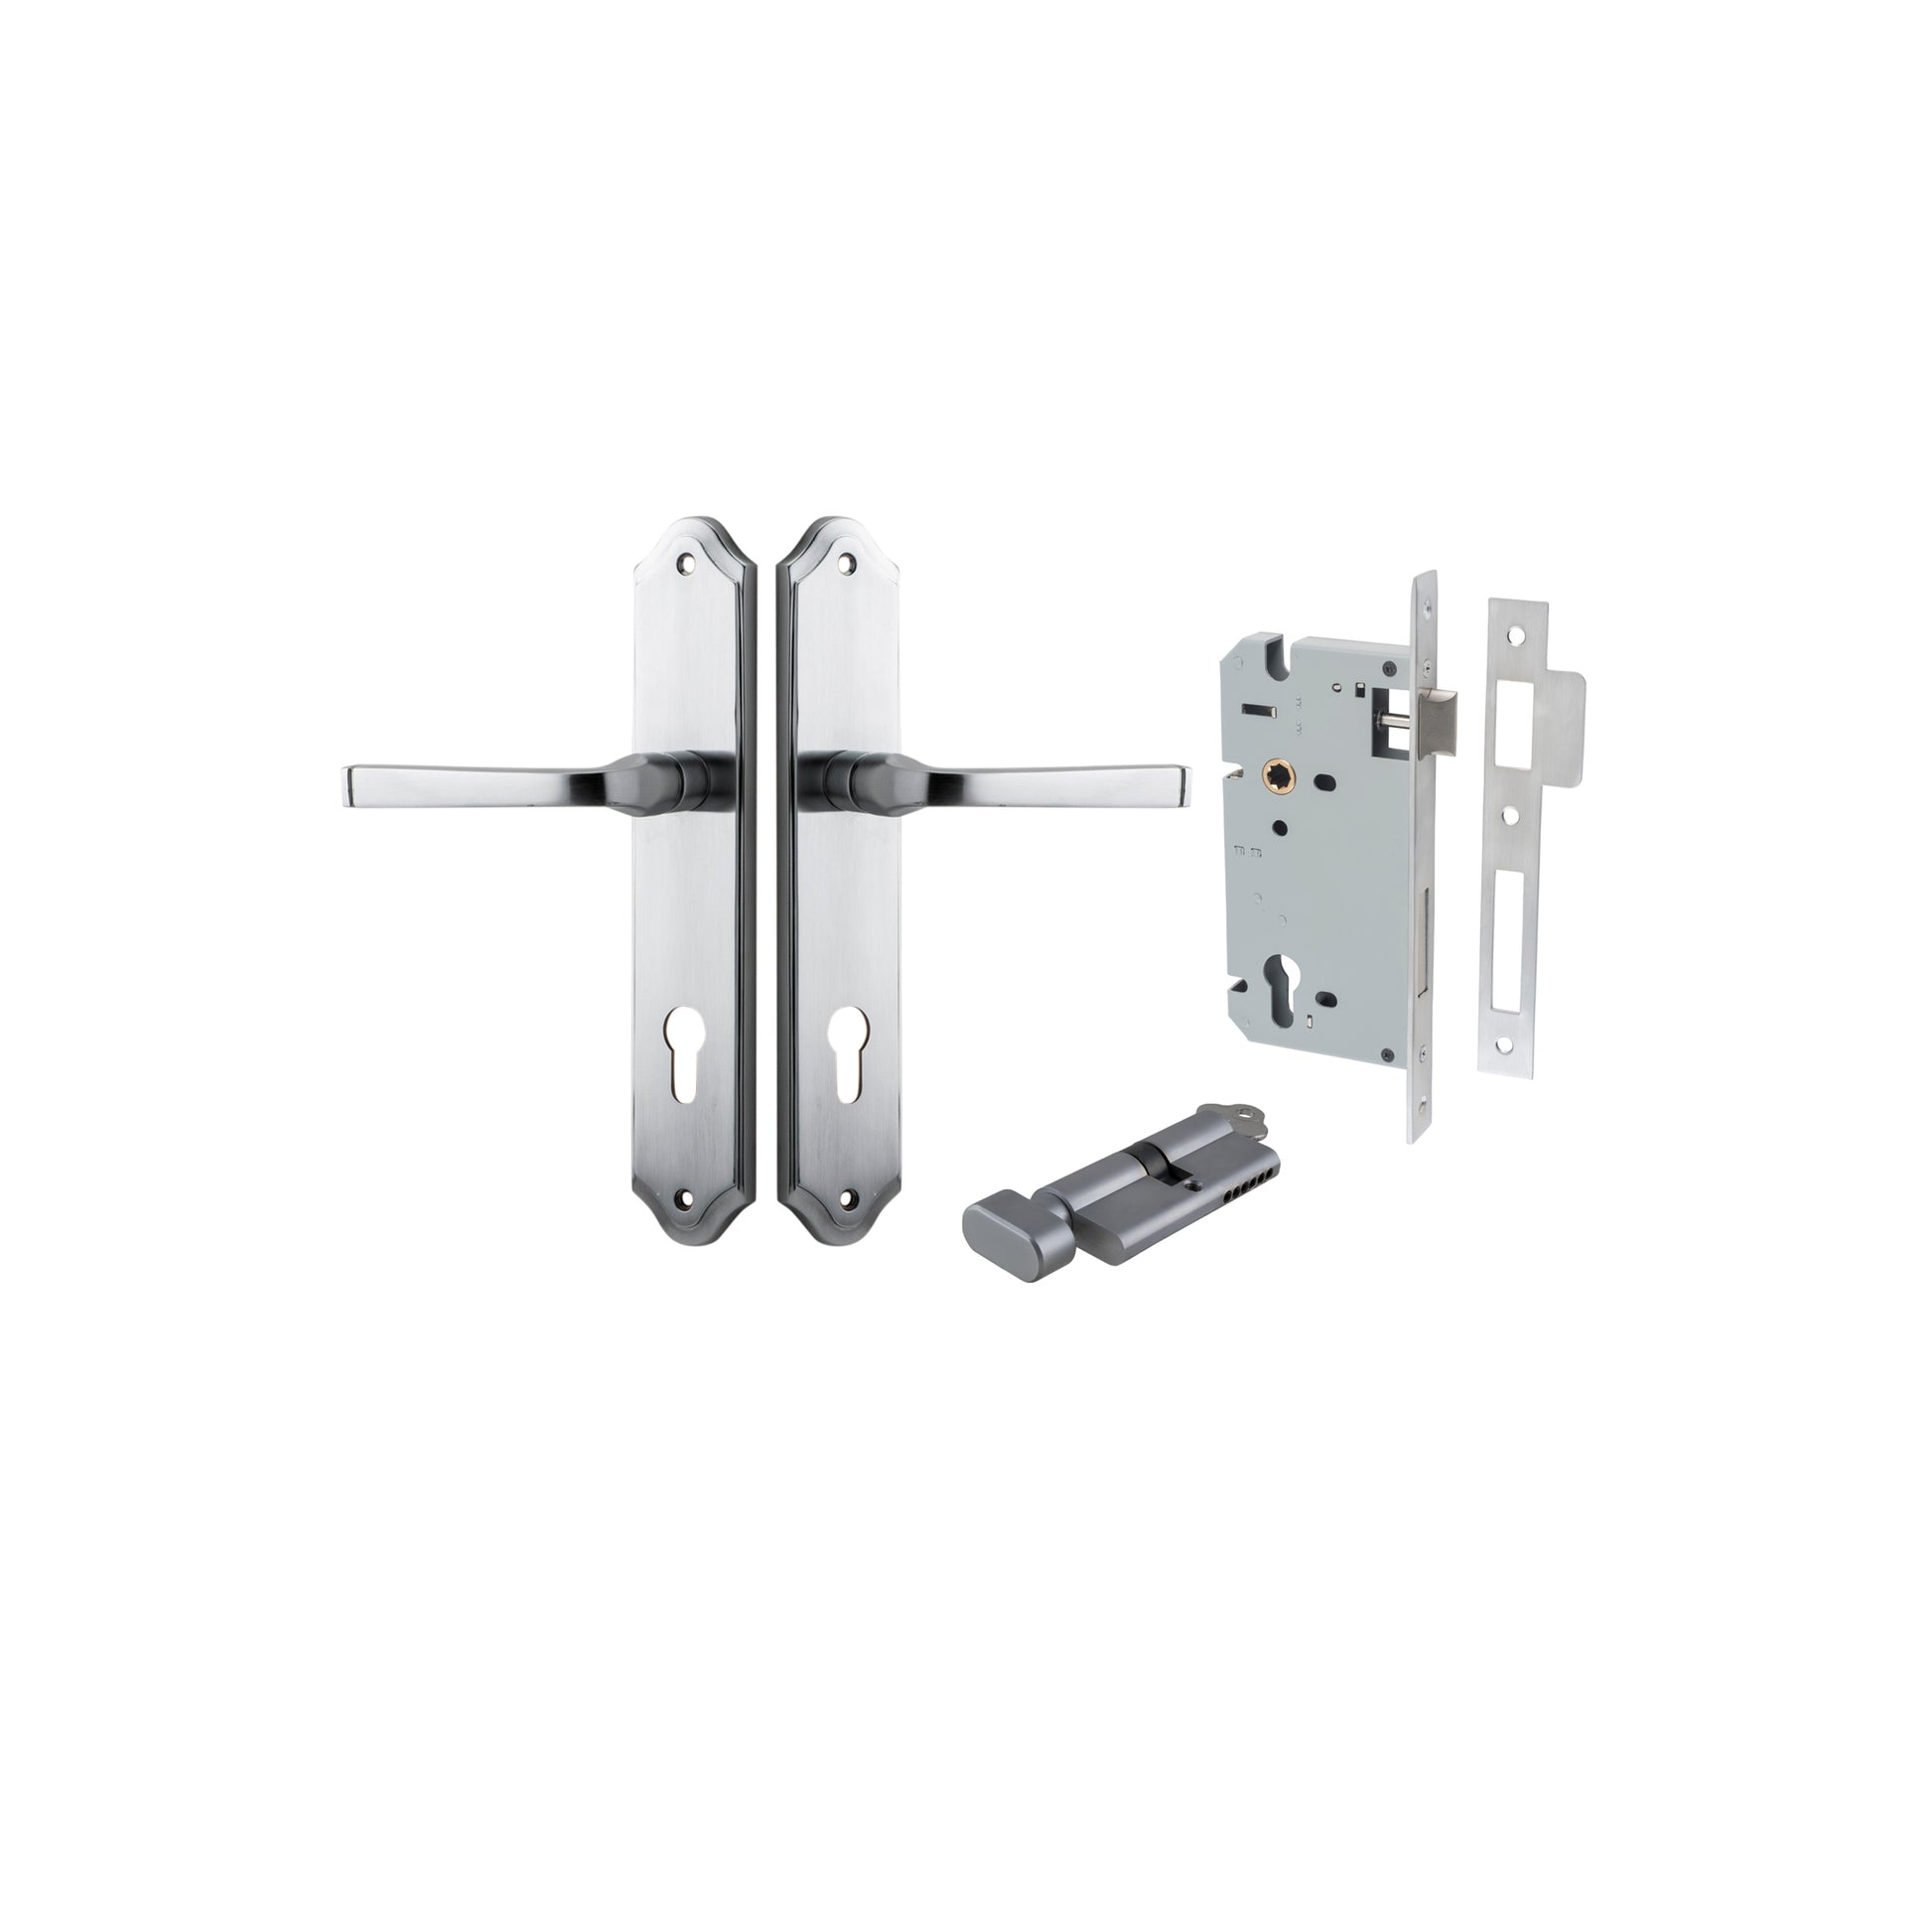 Door Lever Annecy Shouldered Euro Brushed Chrome CTC85mm H240xW50xP65mm Entrance Kit, Mortice Lock Euro Brushed Chrome CTC85mm Backset 60mm, Euro Cylinder Key Thumb 6 Pin Brushed Chrome L70mm KA1 in Brushed Chrome